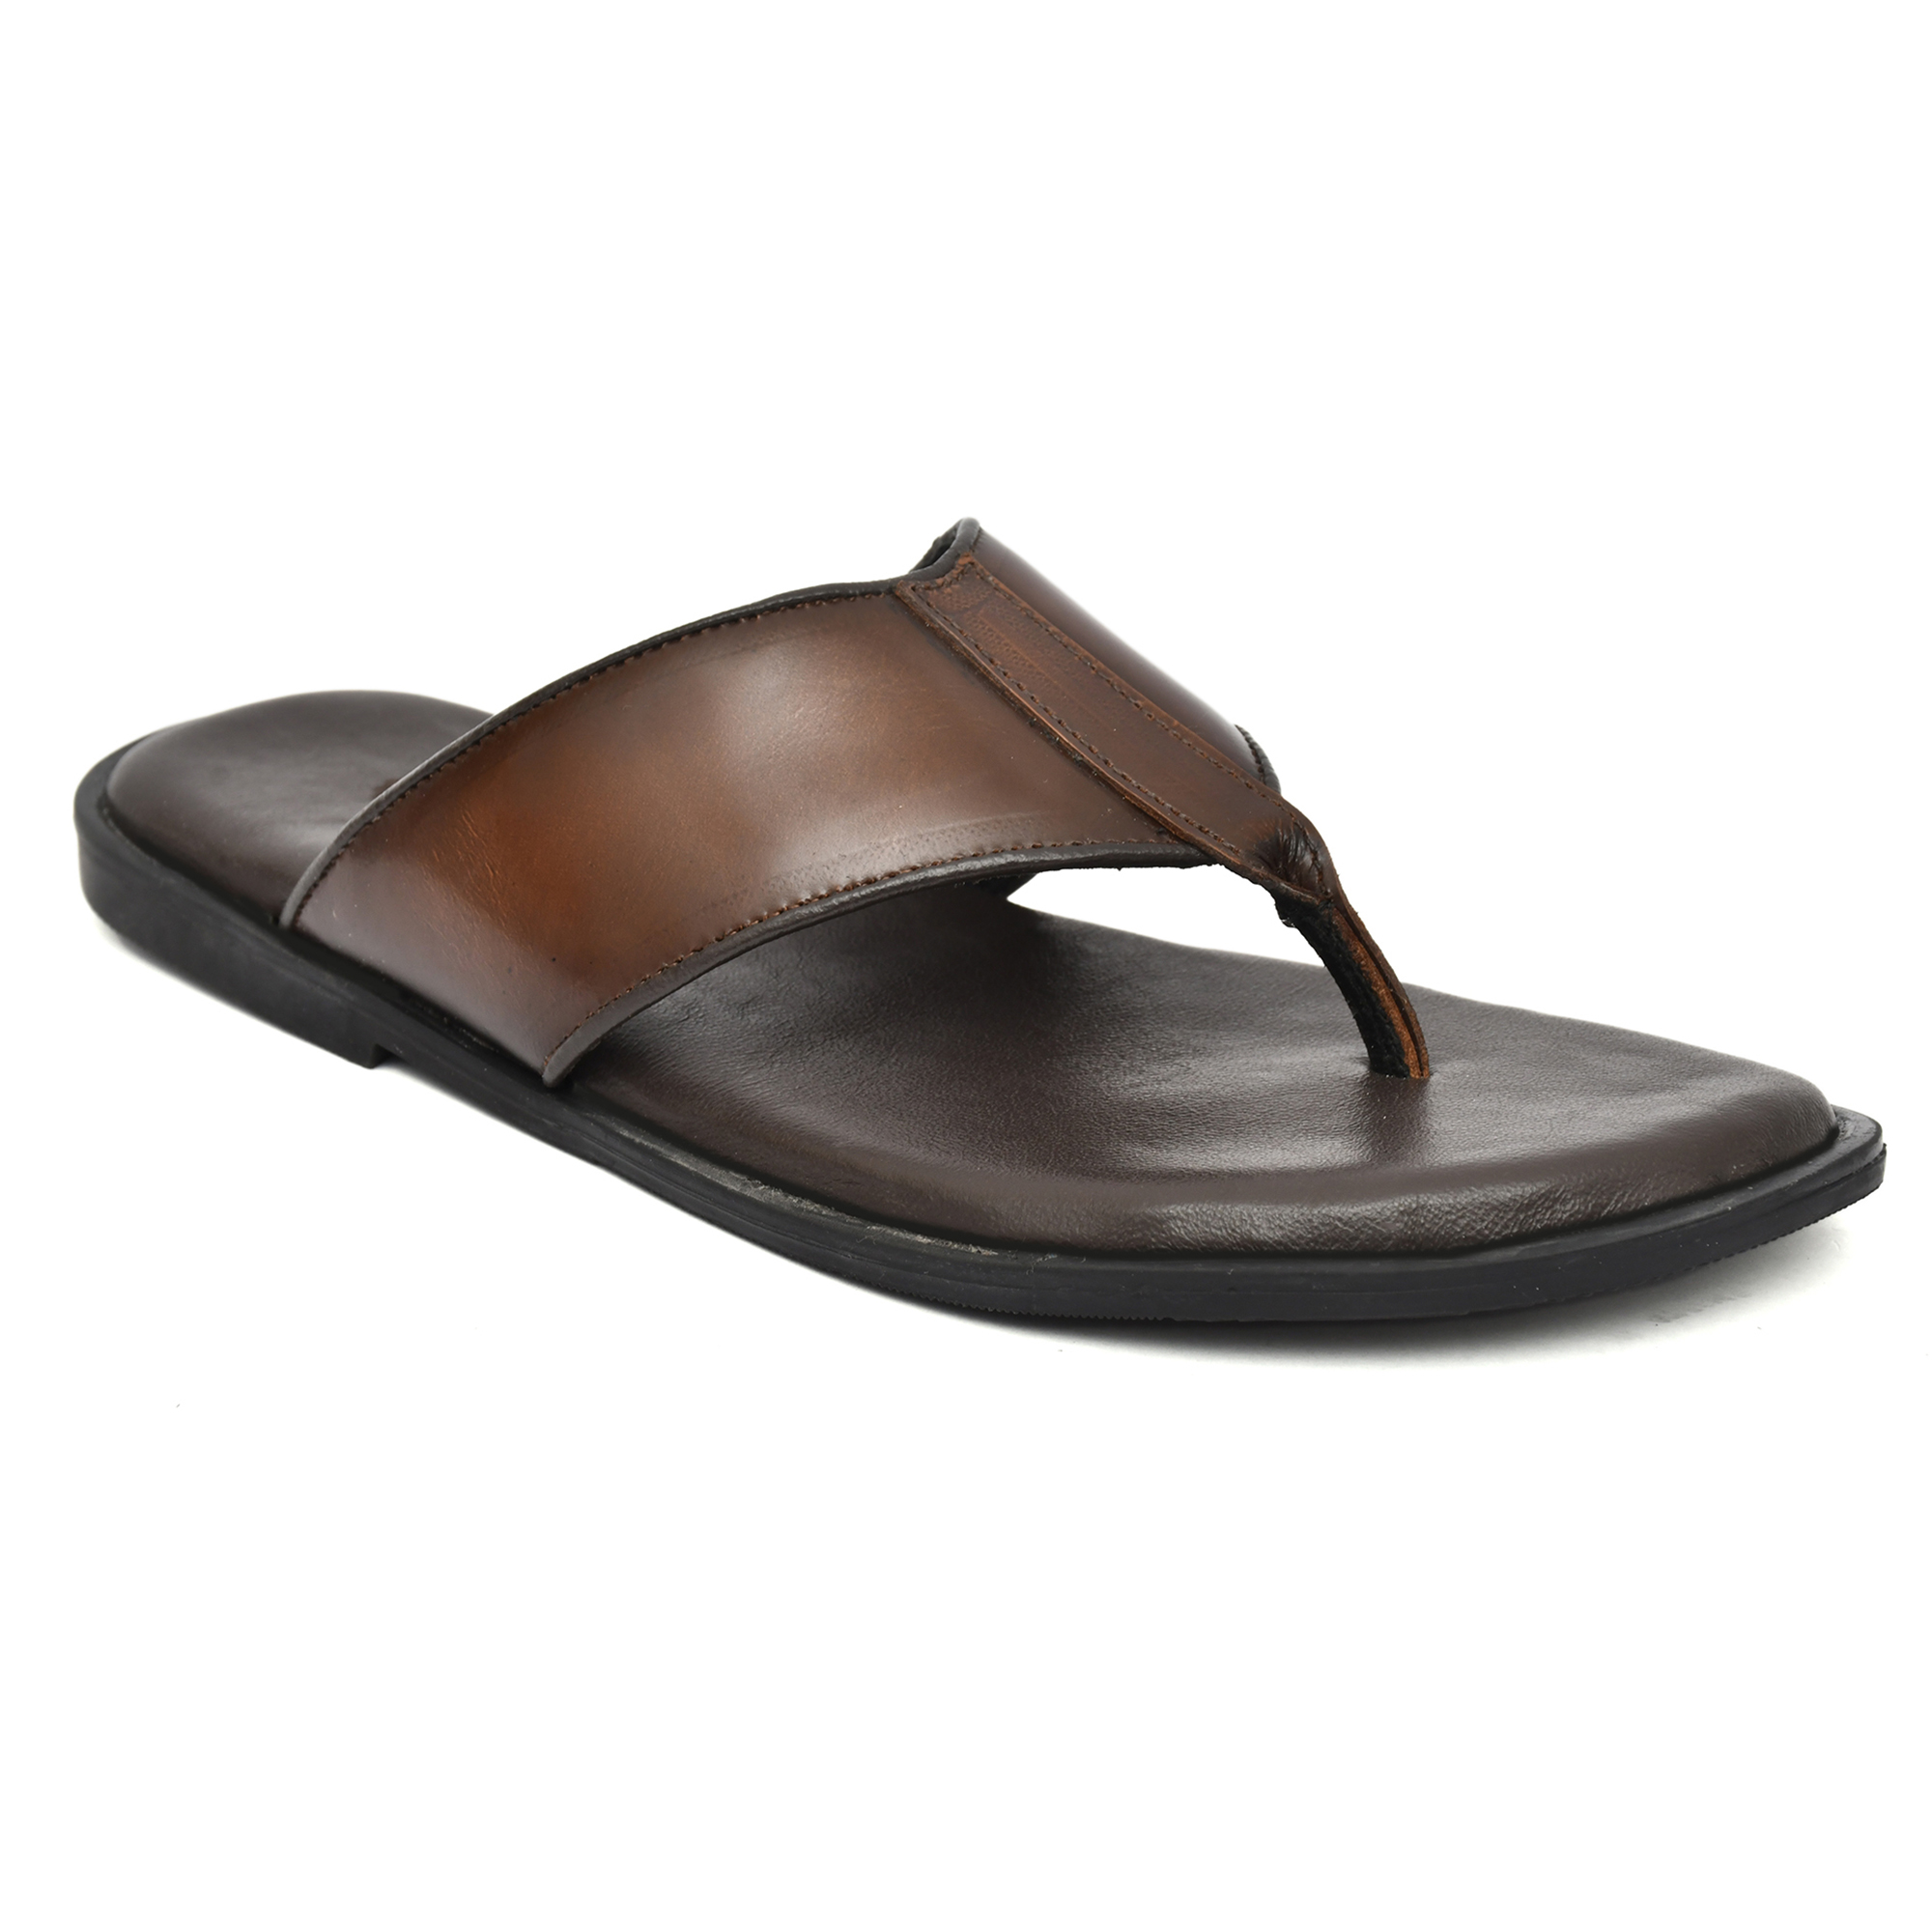 Tan Brushoff Leather Slippers for Men with Memory foam footpad by asm.